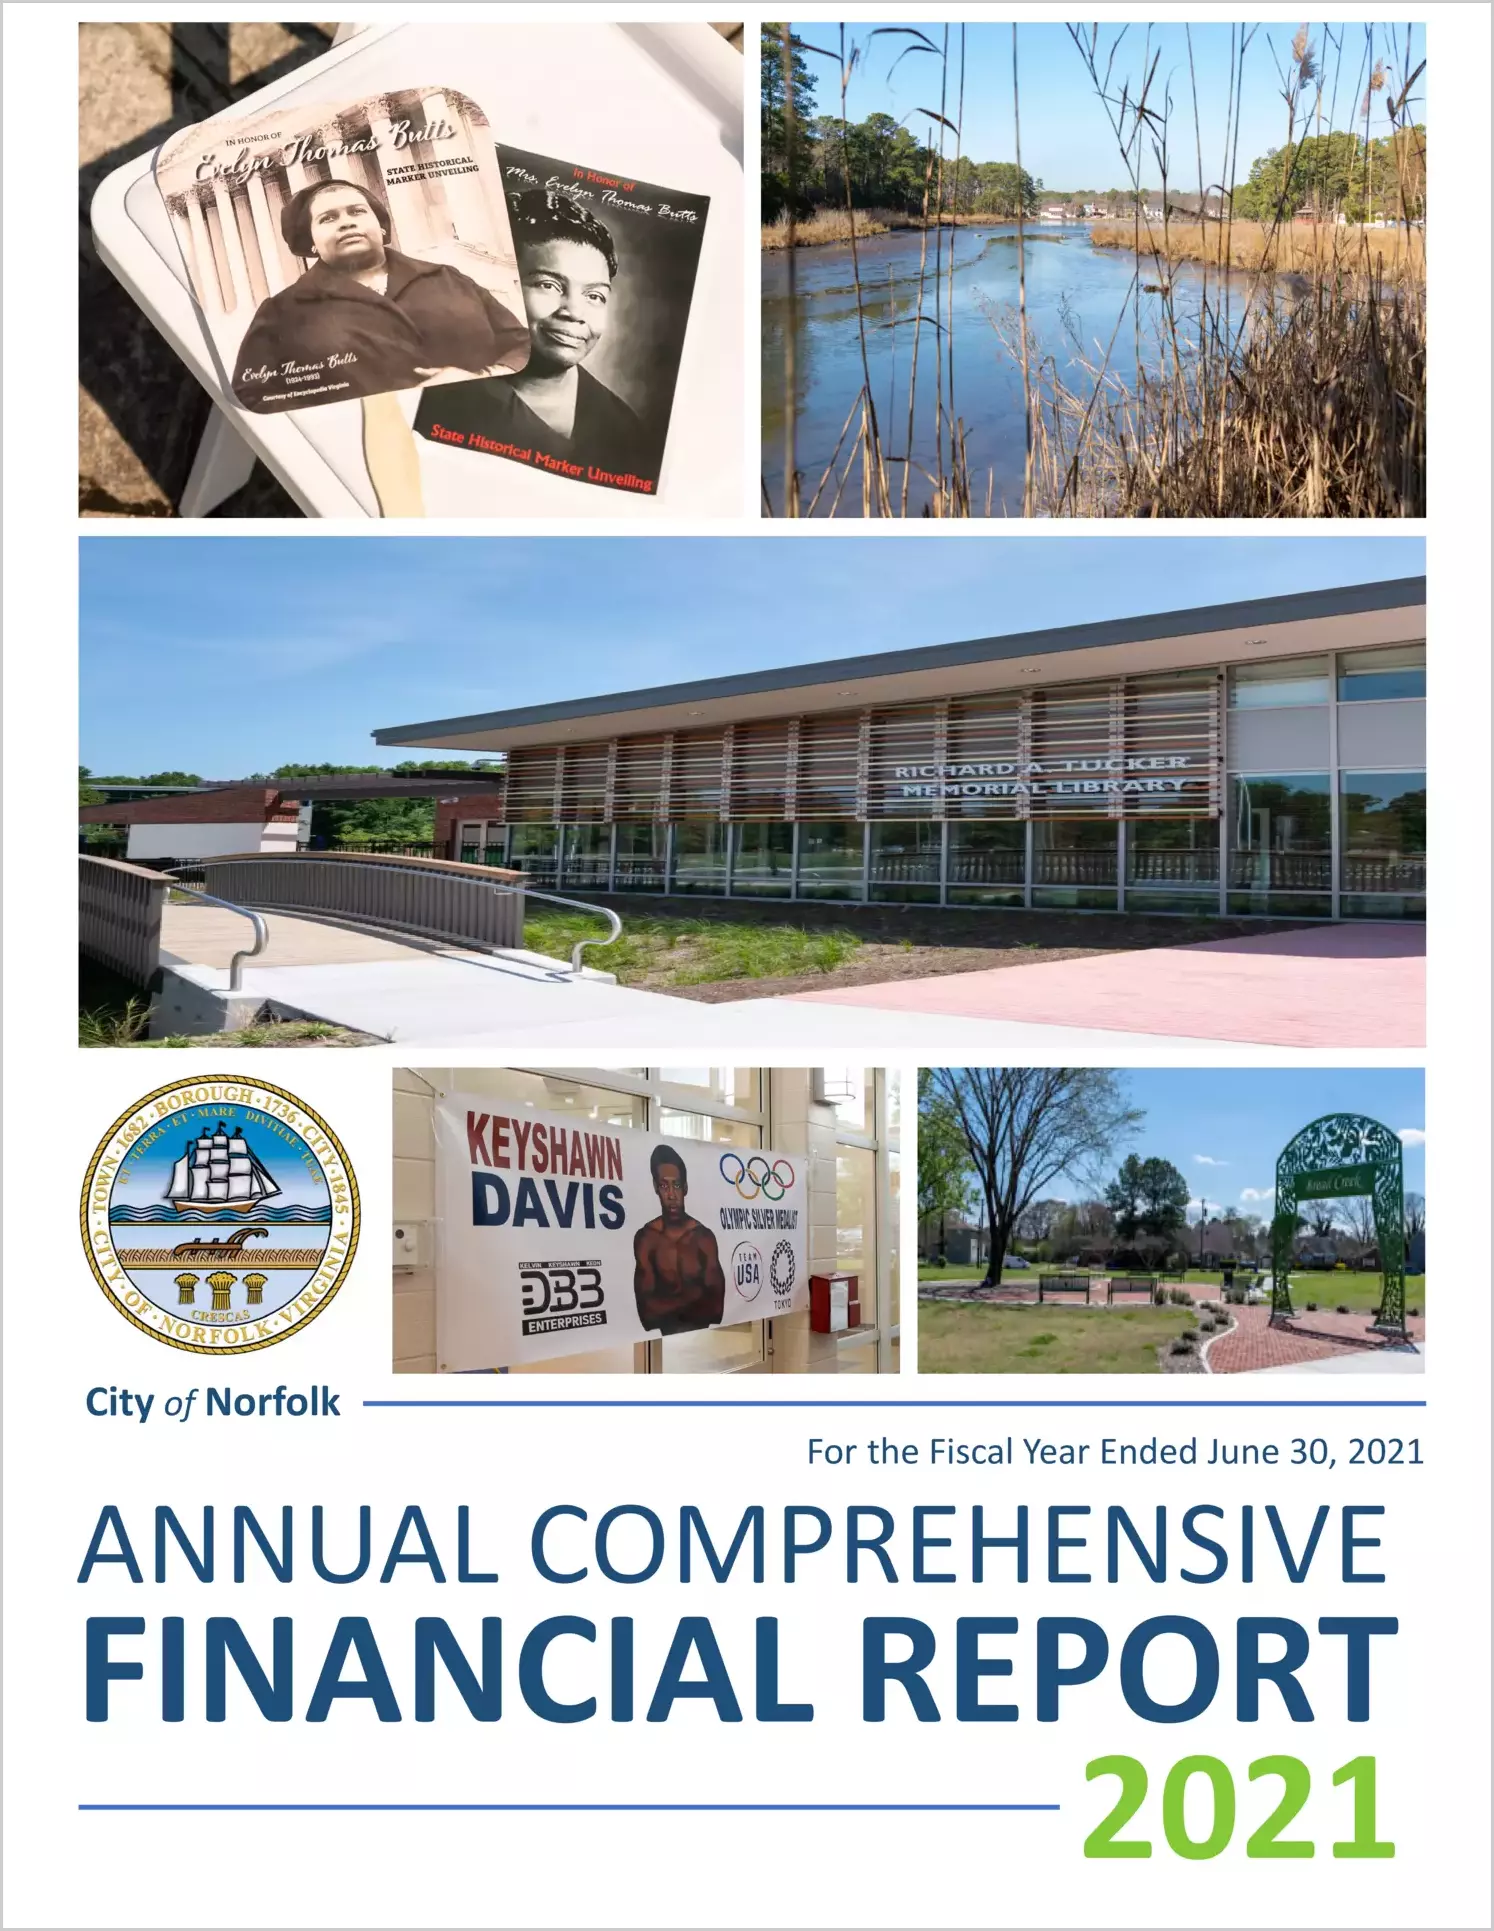 2021 Annual Financial Report for City of Norfolk